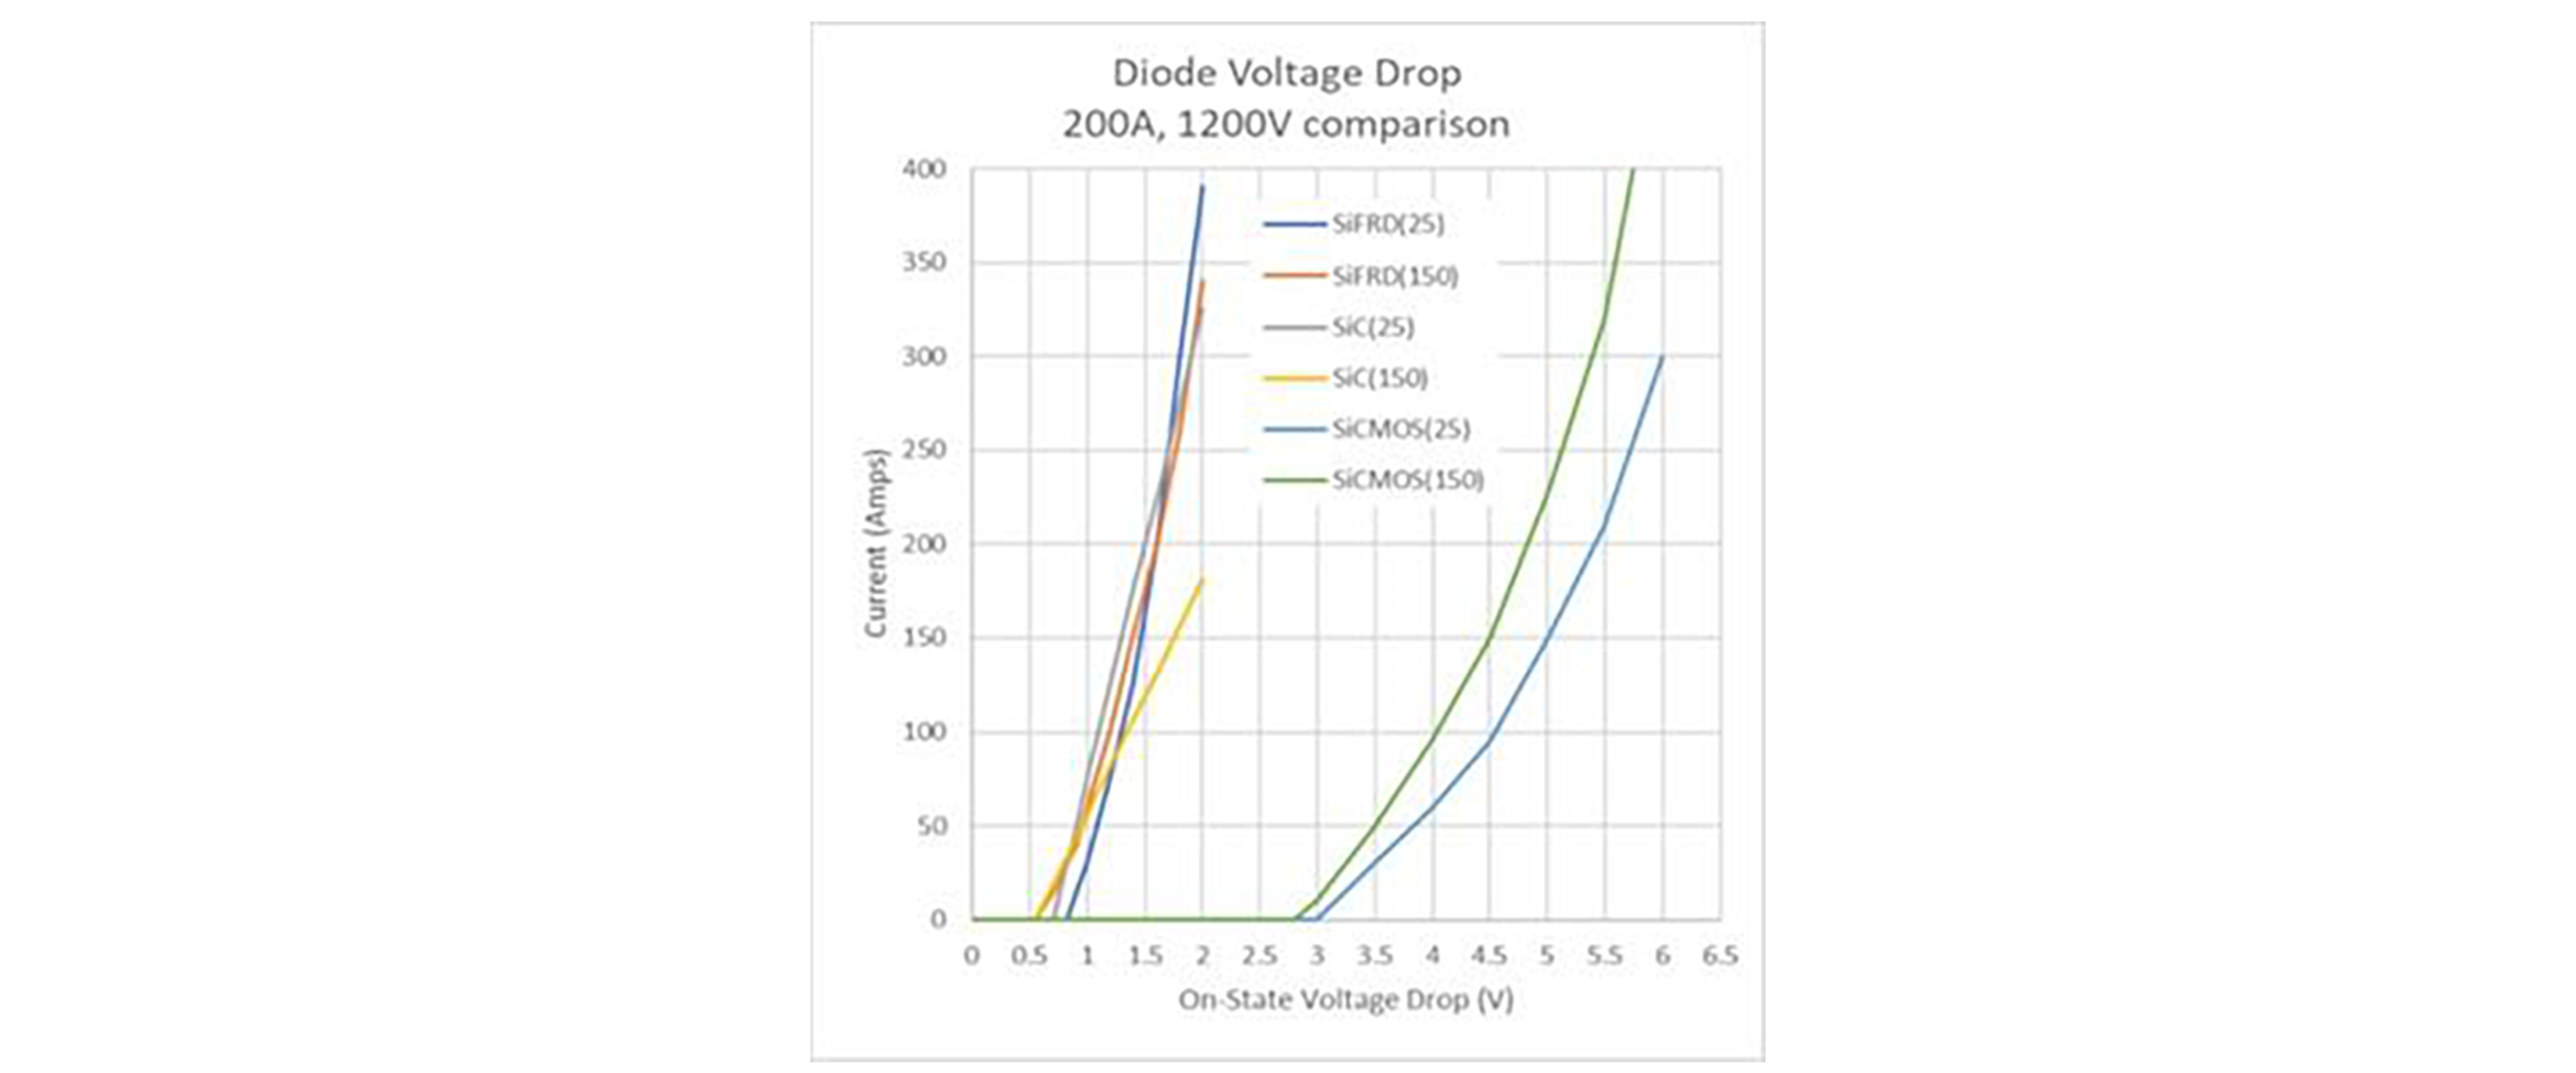 Figure 4: Comparison of body diode forward voltage drop between SiC MOSFET and cascode structure SiC FET